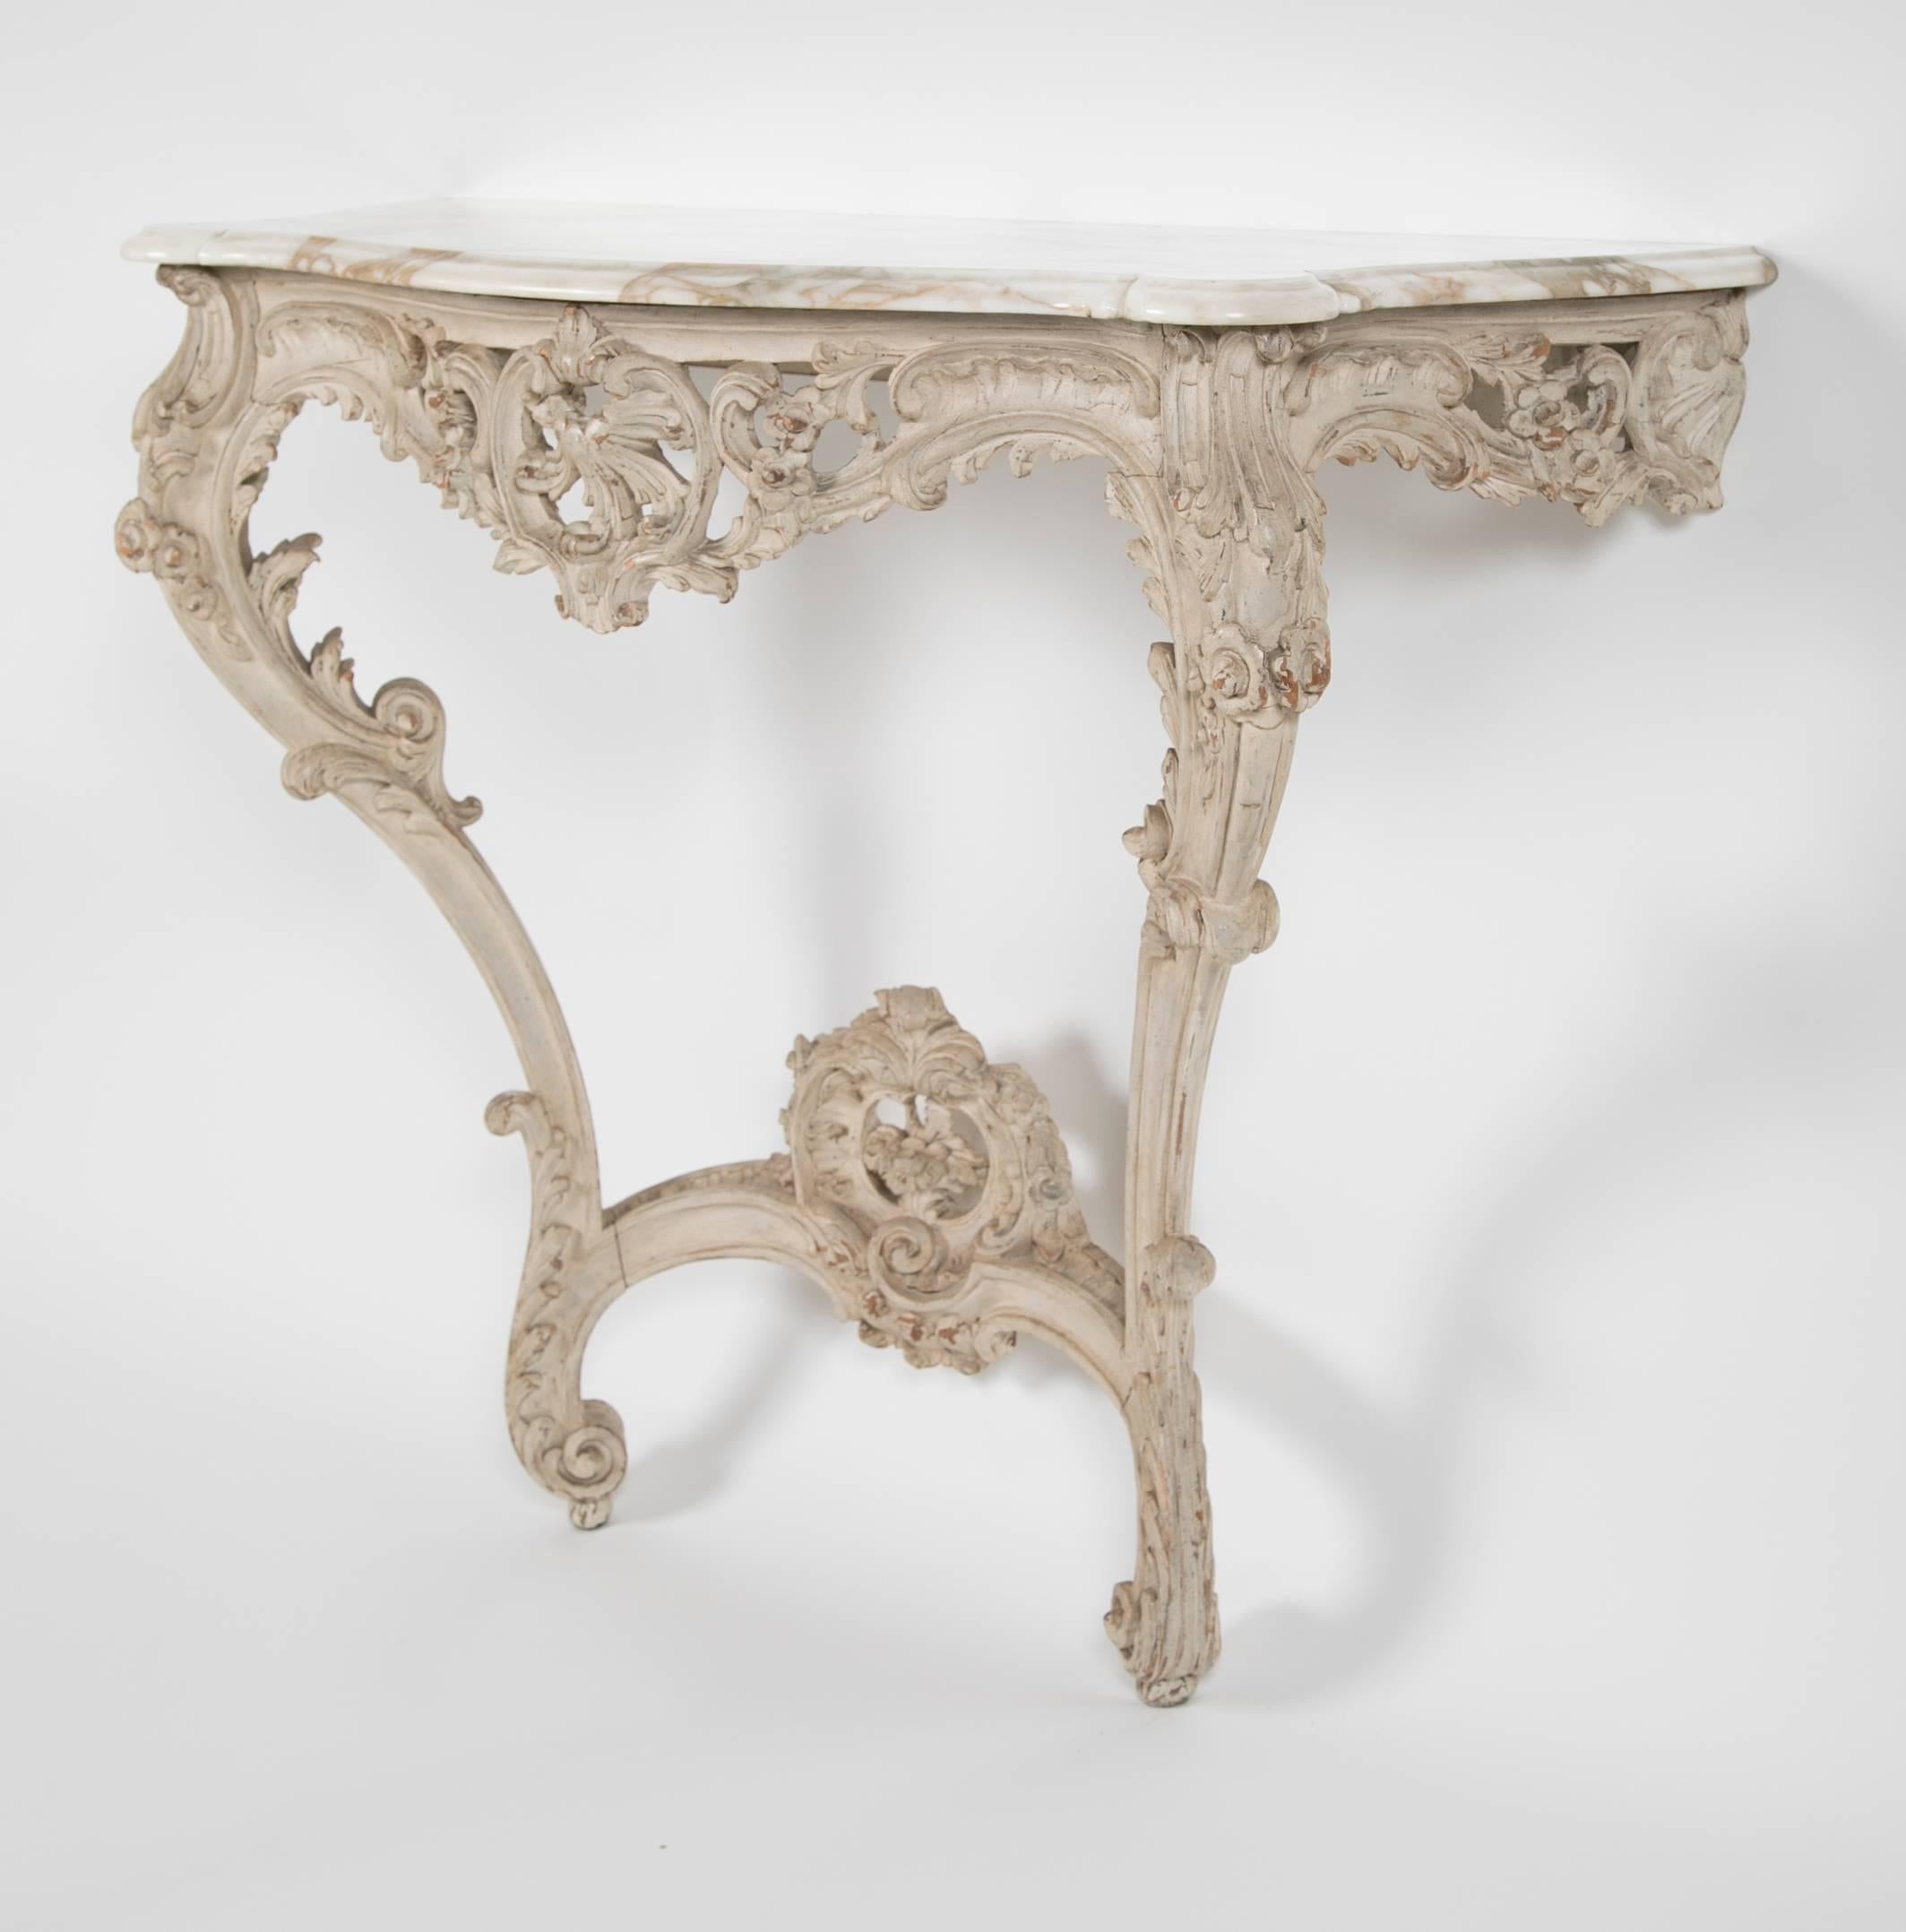 A late 19th century French pier table with painted carved wood frame, scrolling in form, and marble top.